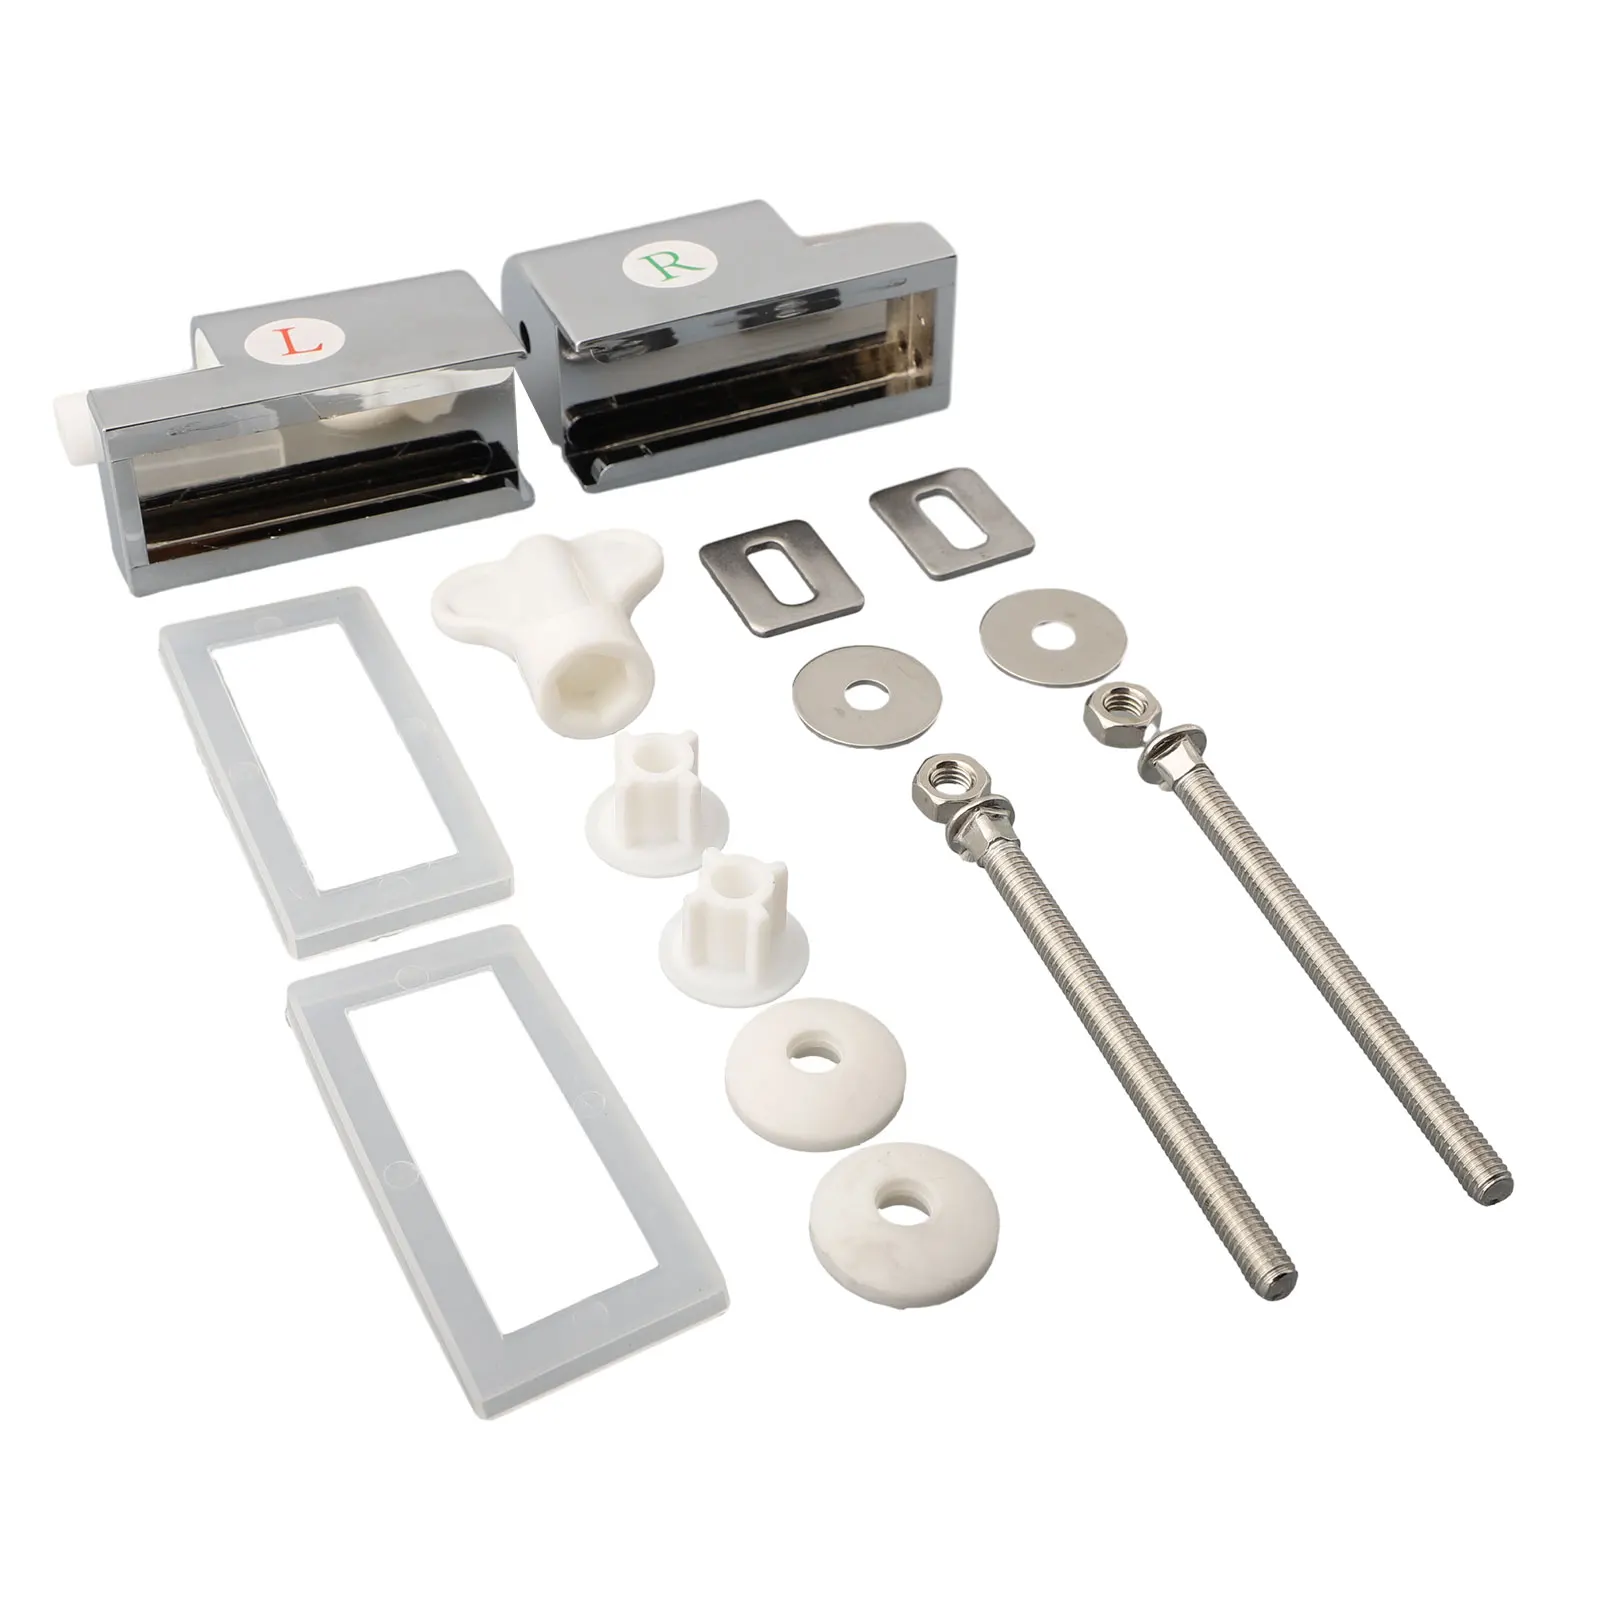 Hinge Kit Toilet Cover Slow-down Connector Toilet Seat Hinges Toilets Soft Close Replacement Accessories Bathroom Hardware